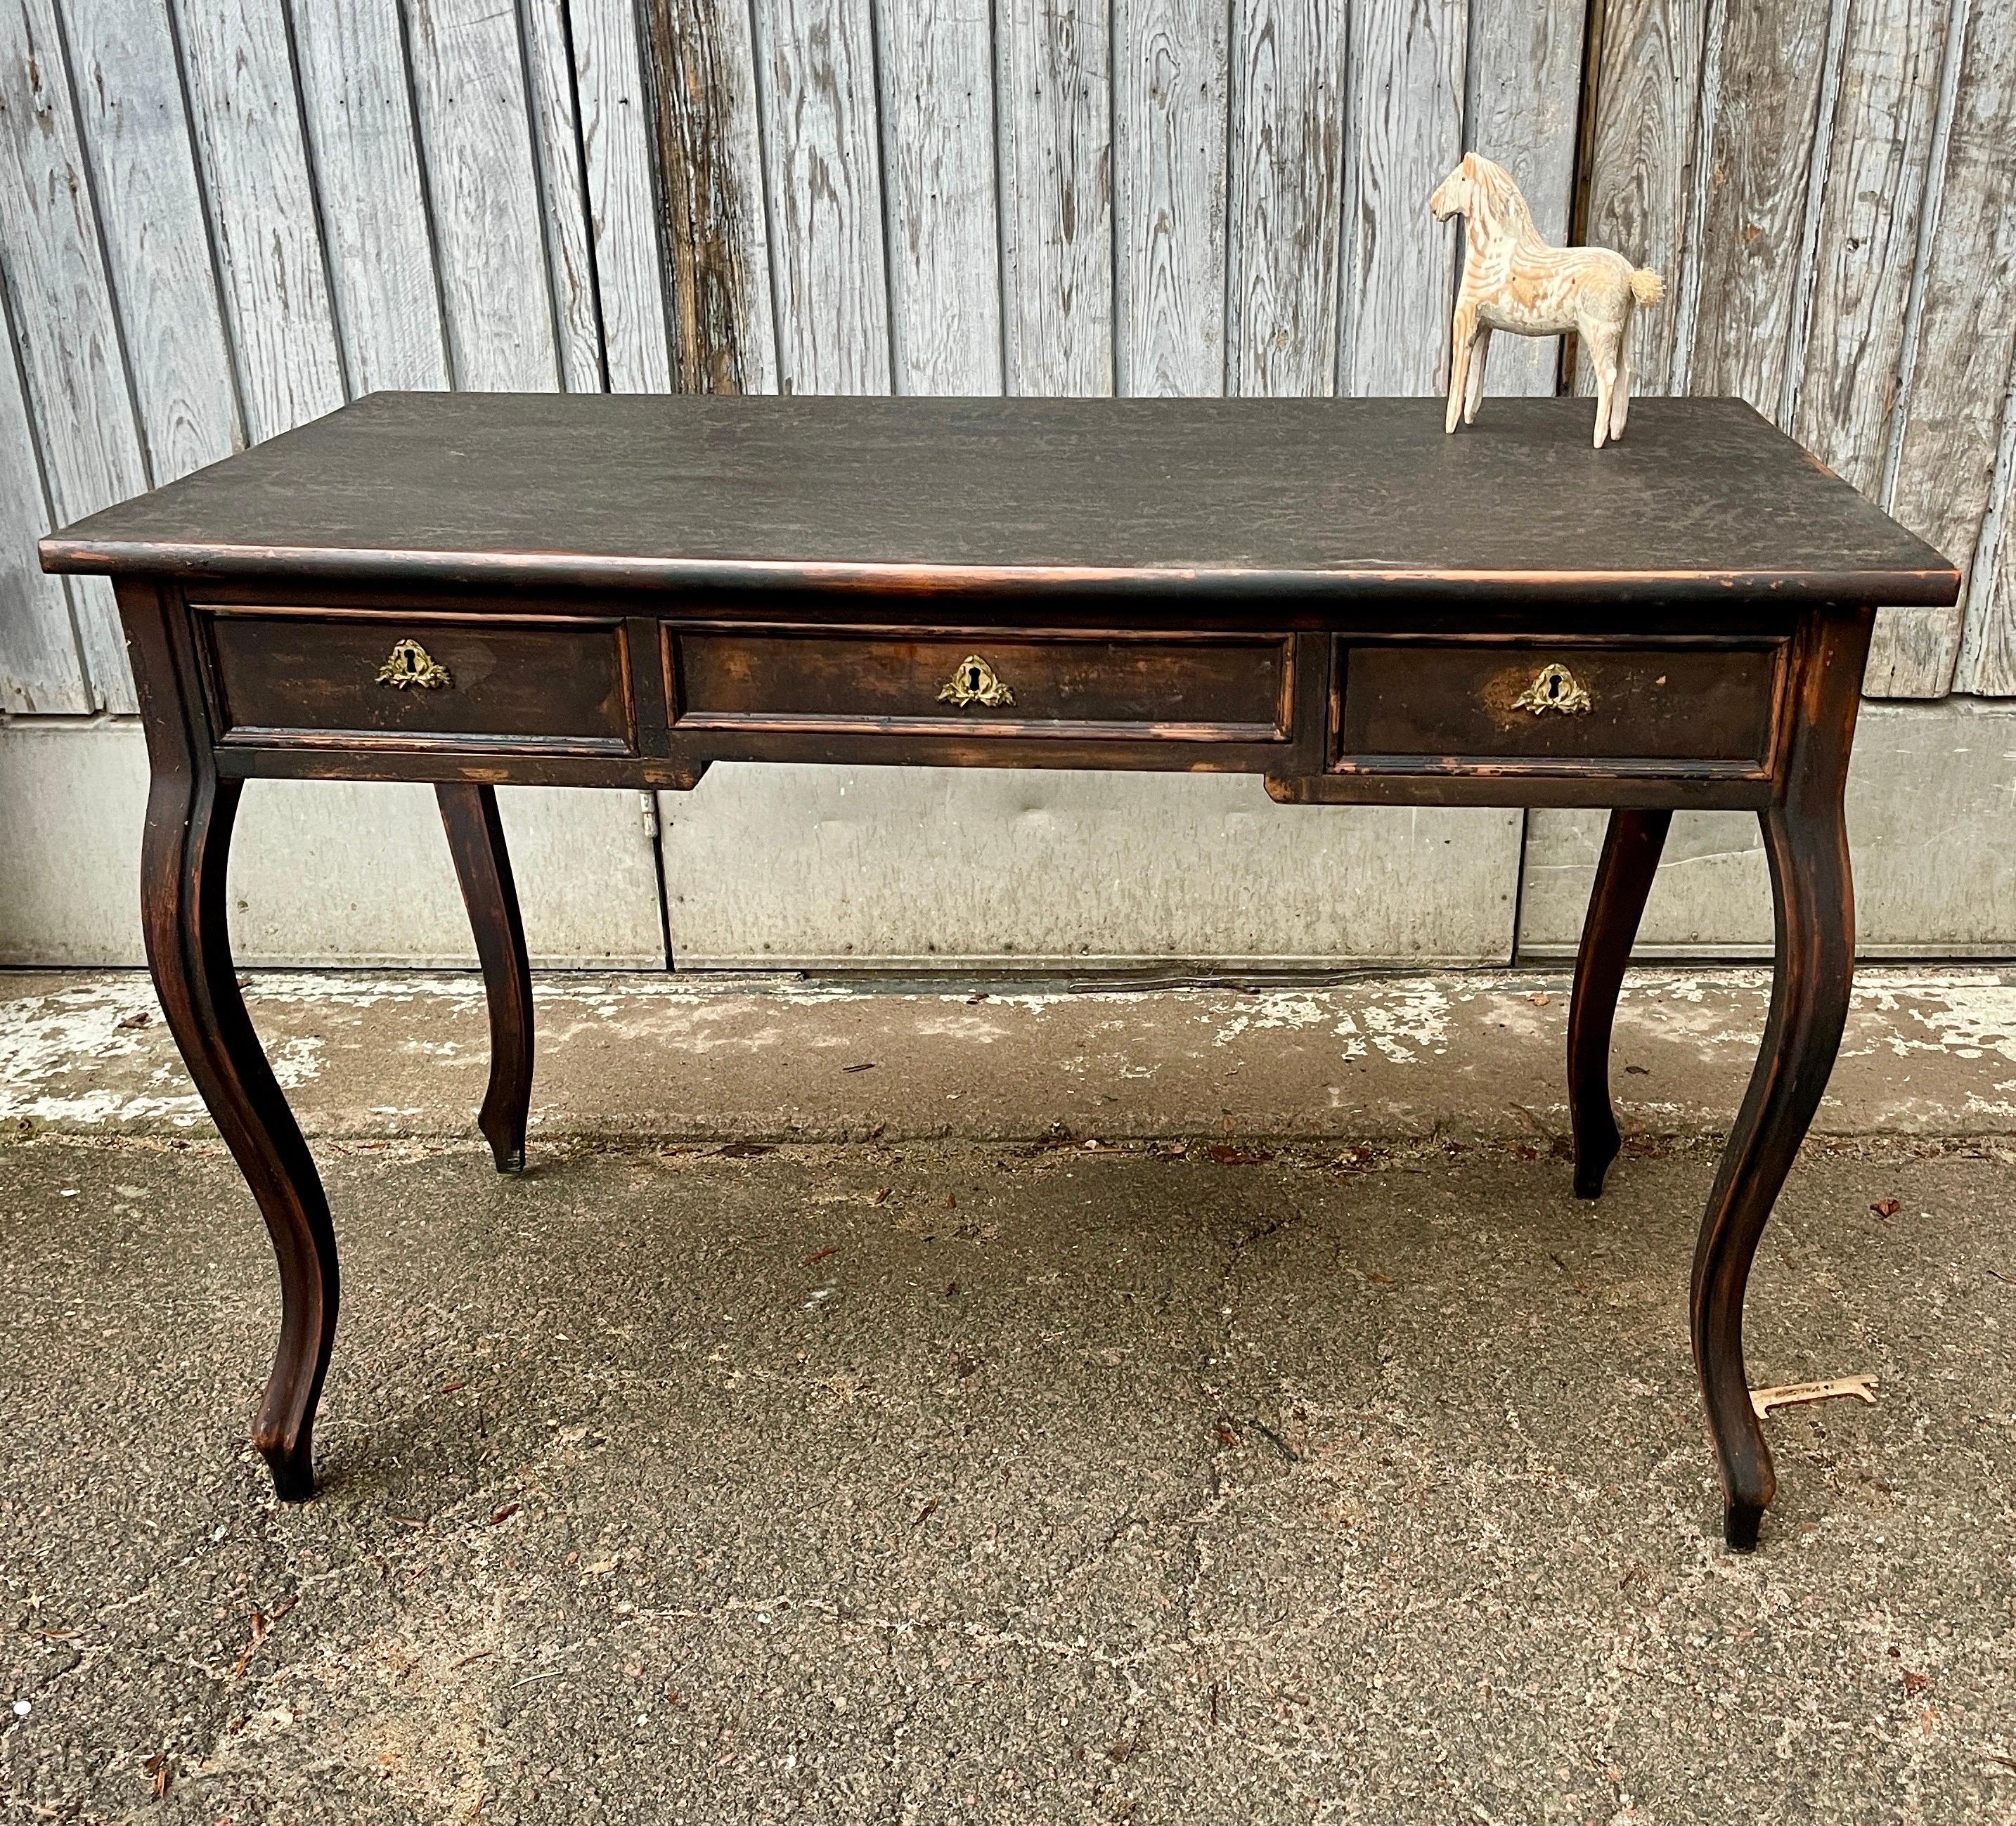 19th Century Swedish Gustavian Black Writing Desk With 3 Drawers In Good Condition For Sale In Haddonfield, NJ